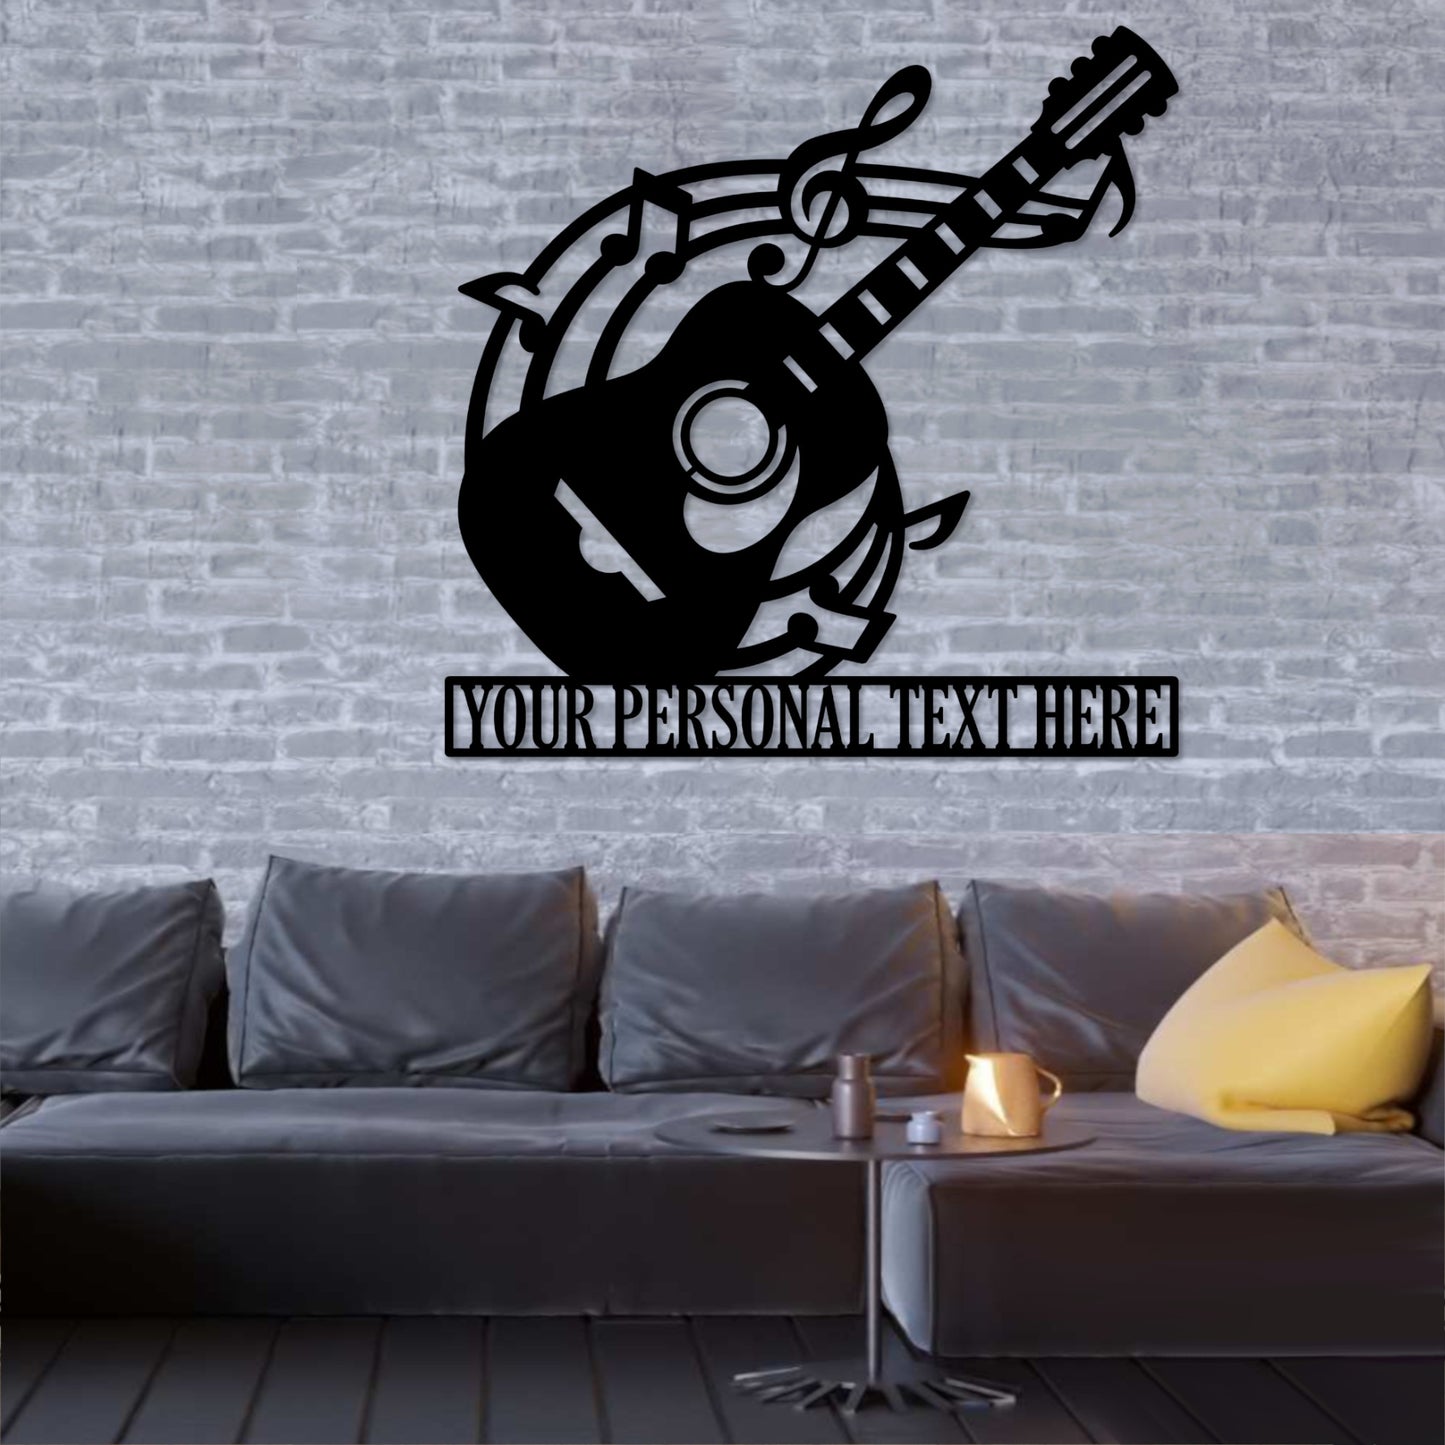 Personalized Acoustic Guitar Lover Name Metal Art Sign